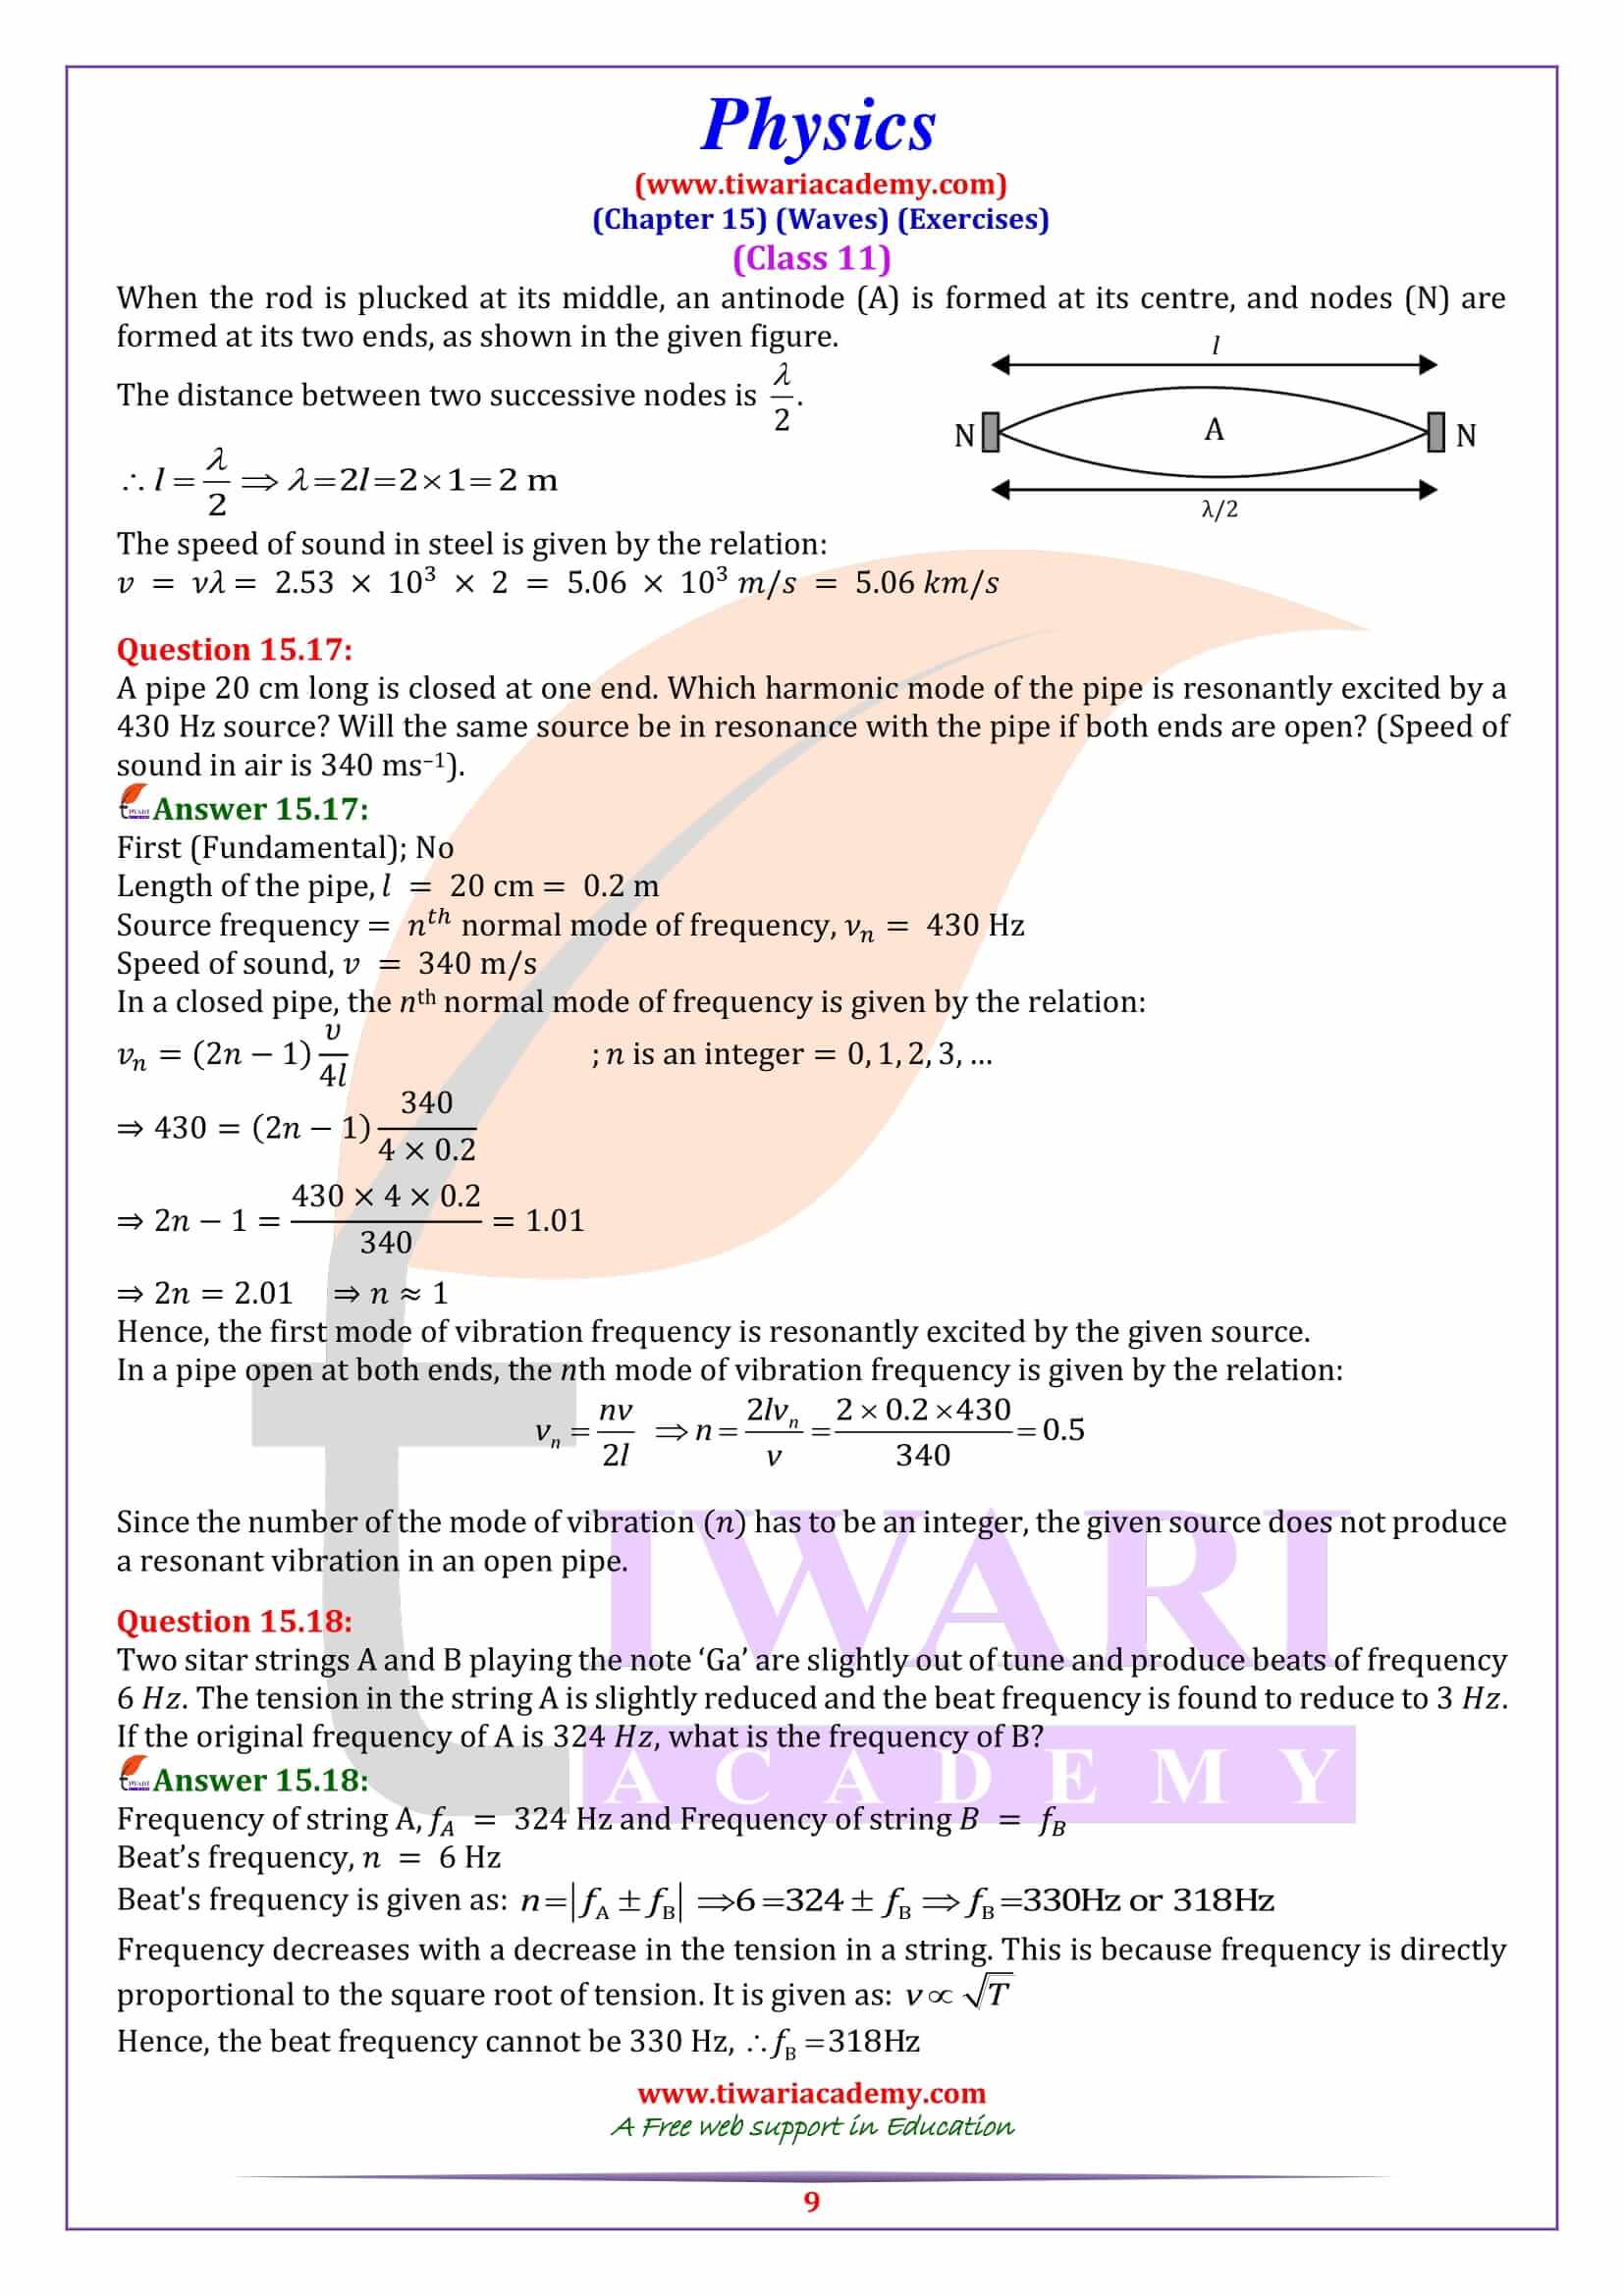 Class 11 Physics Chapter 15 answers in PDF